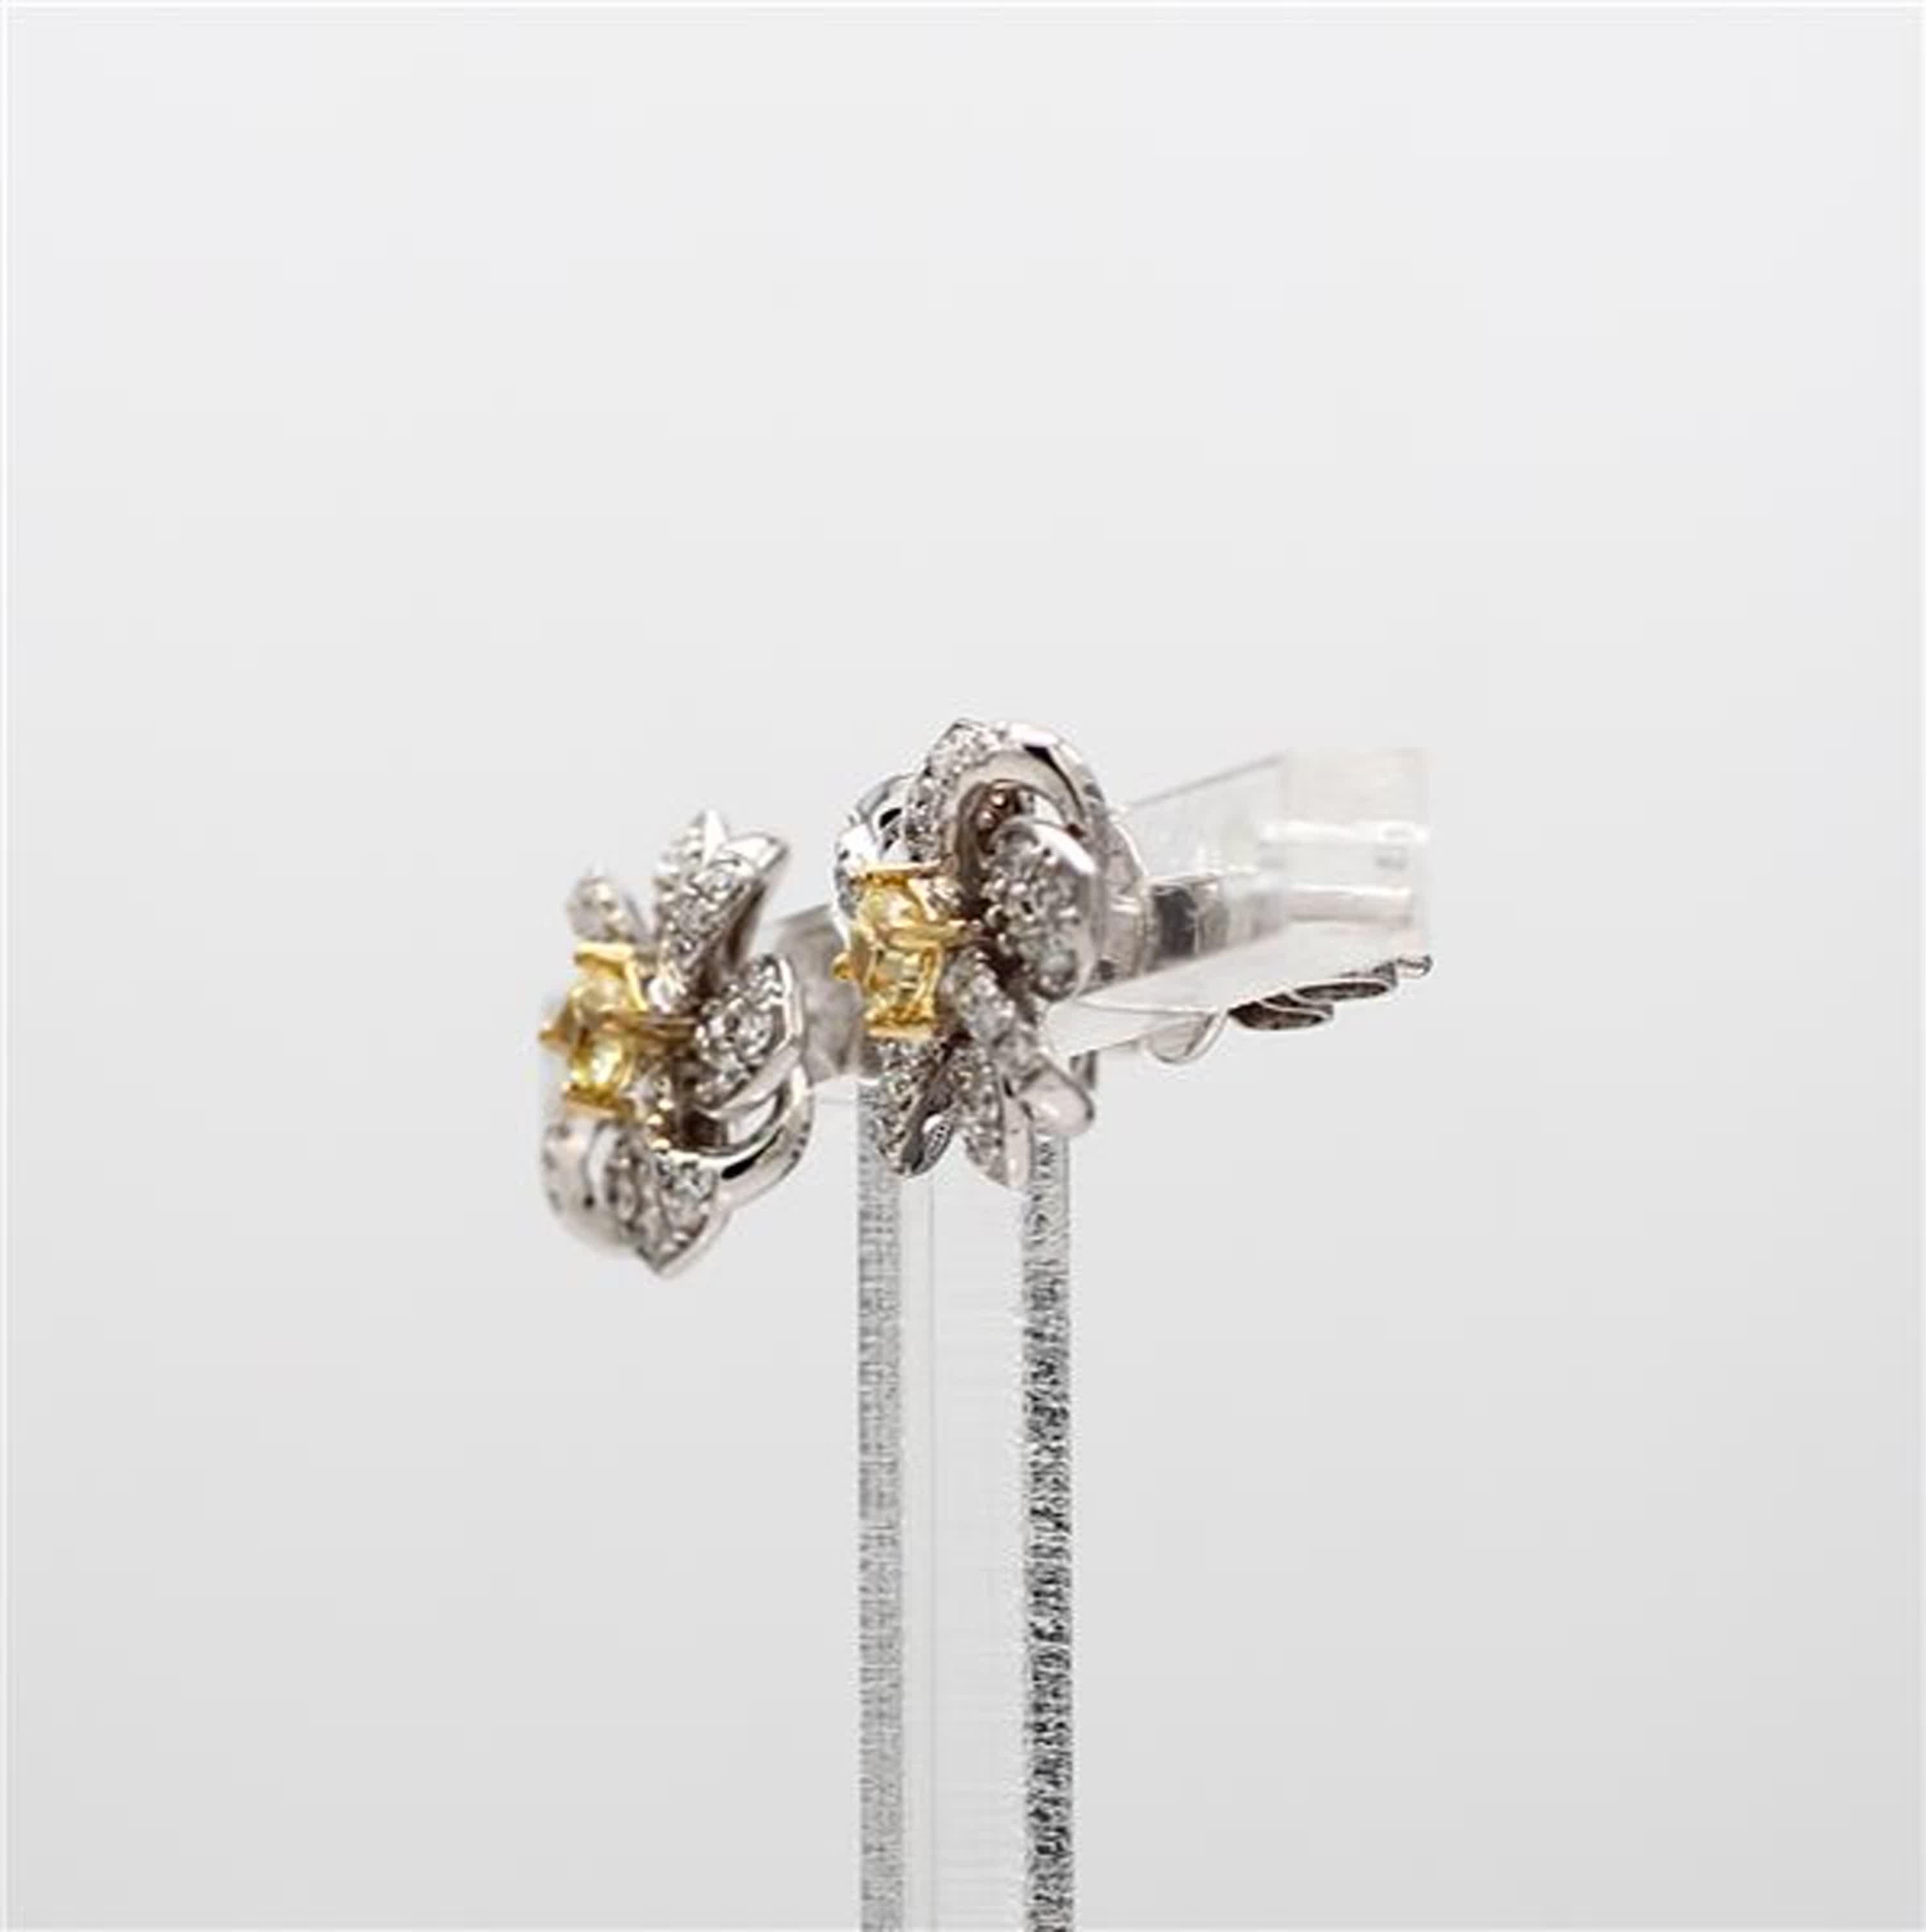 Contemporary Natural Yellow Cushion and White Diamond .76 Carat TW Gold Stud Earrings